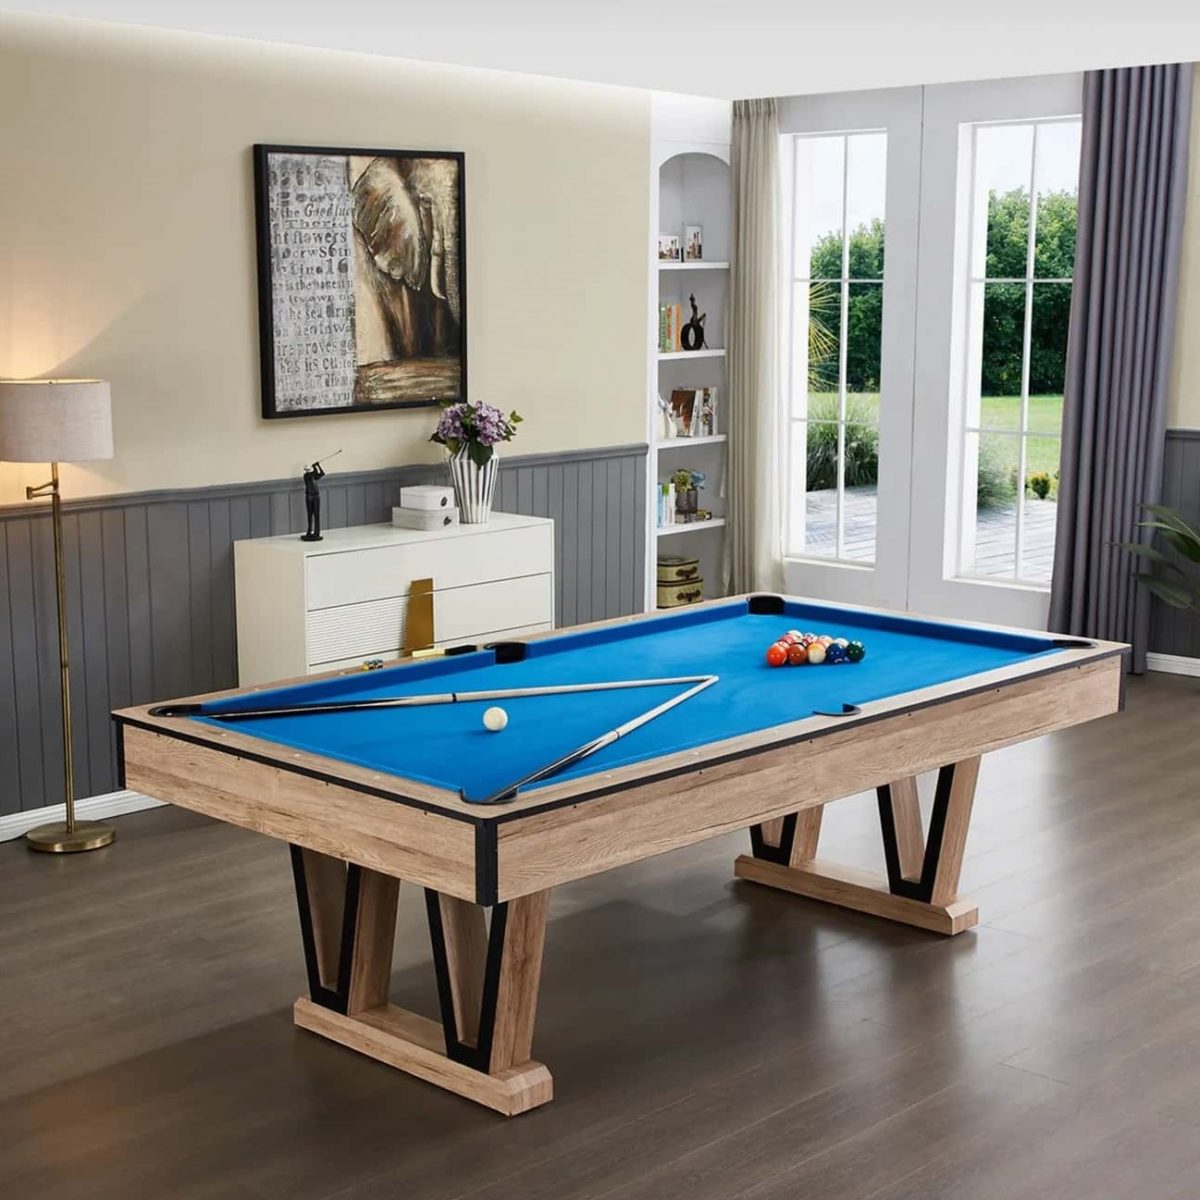 Best Pool Table Brands 10 1 1200x1200 